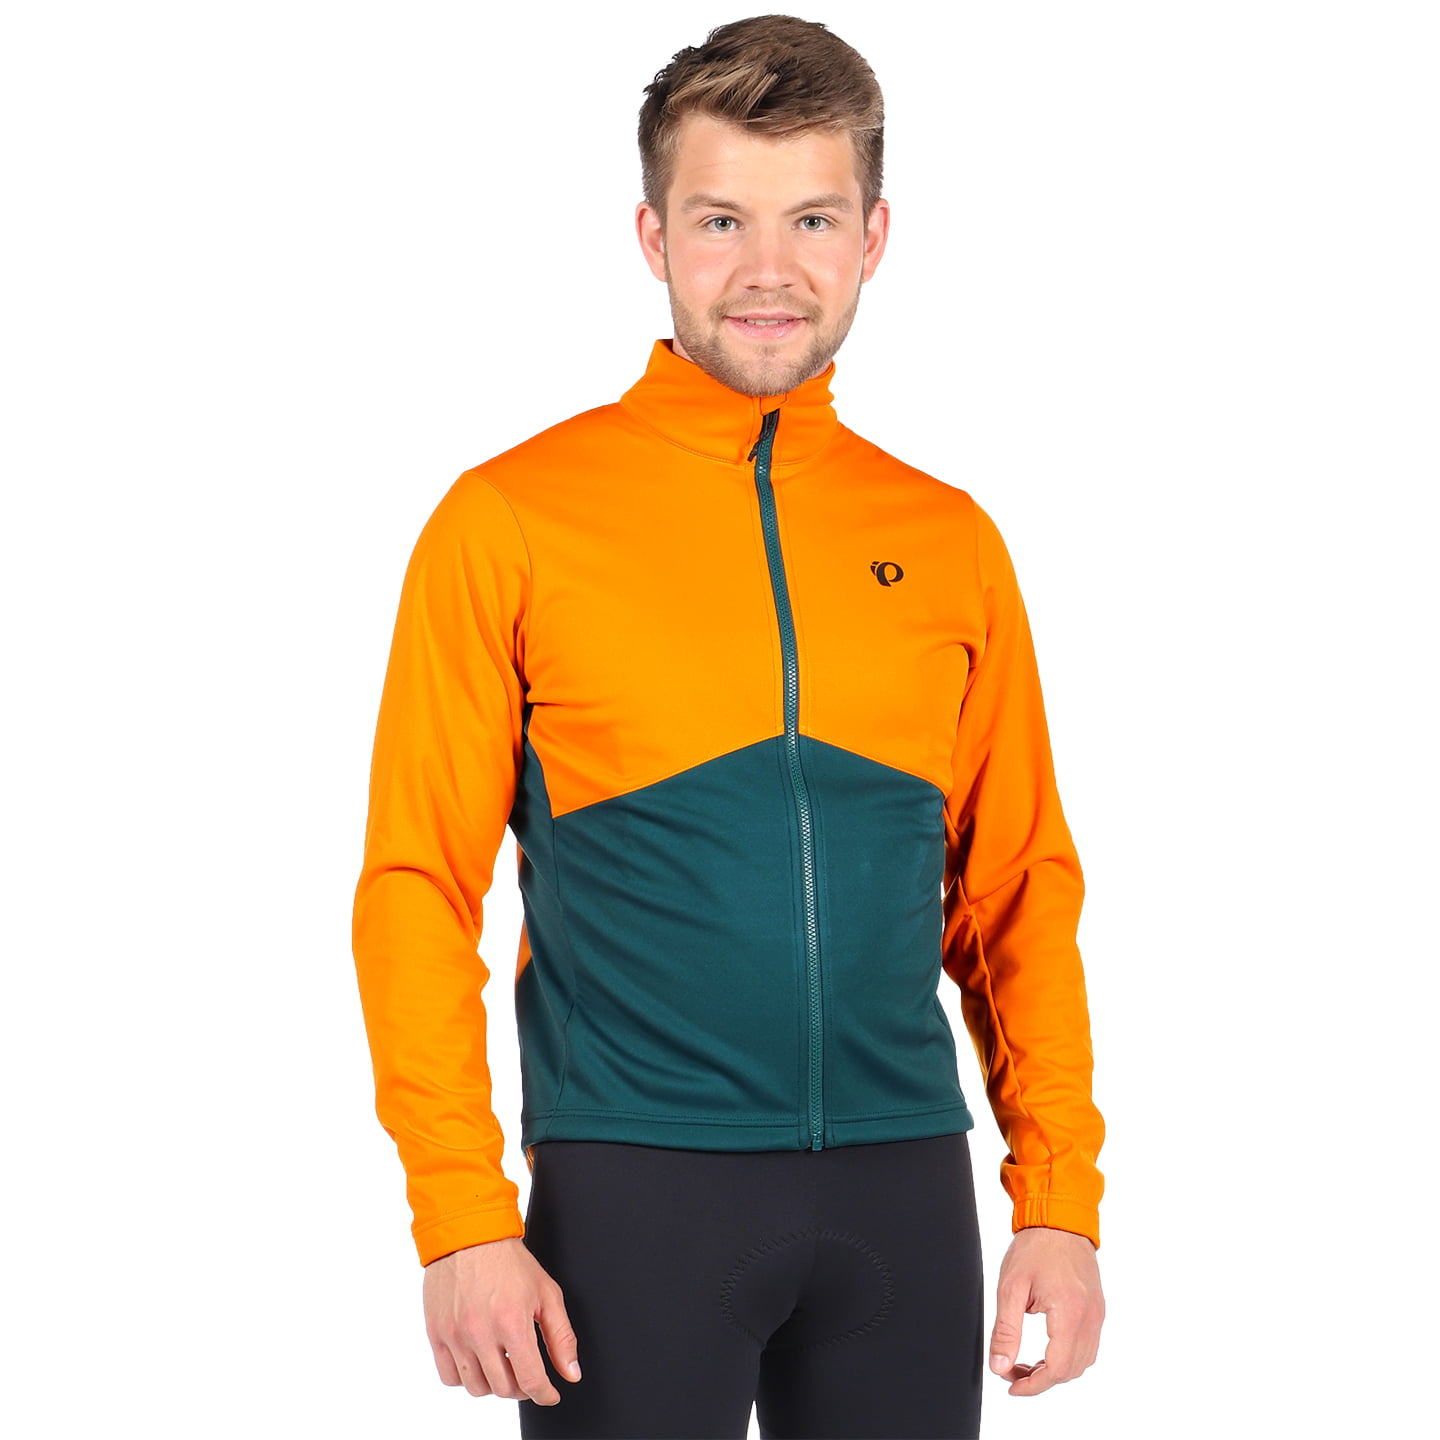 PEARL IZUMI Quest AmFib Winter Jacket Thermal Jacket, for men, size XL, Cycle jacket, Cycle gear